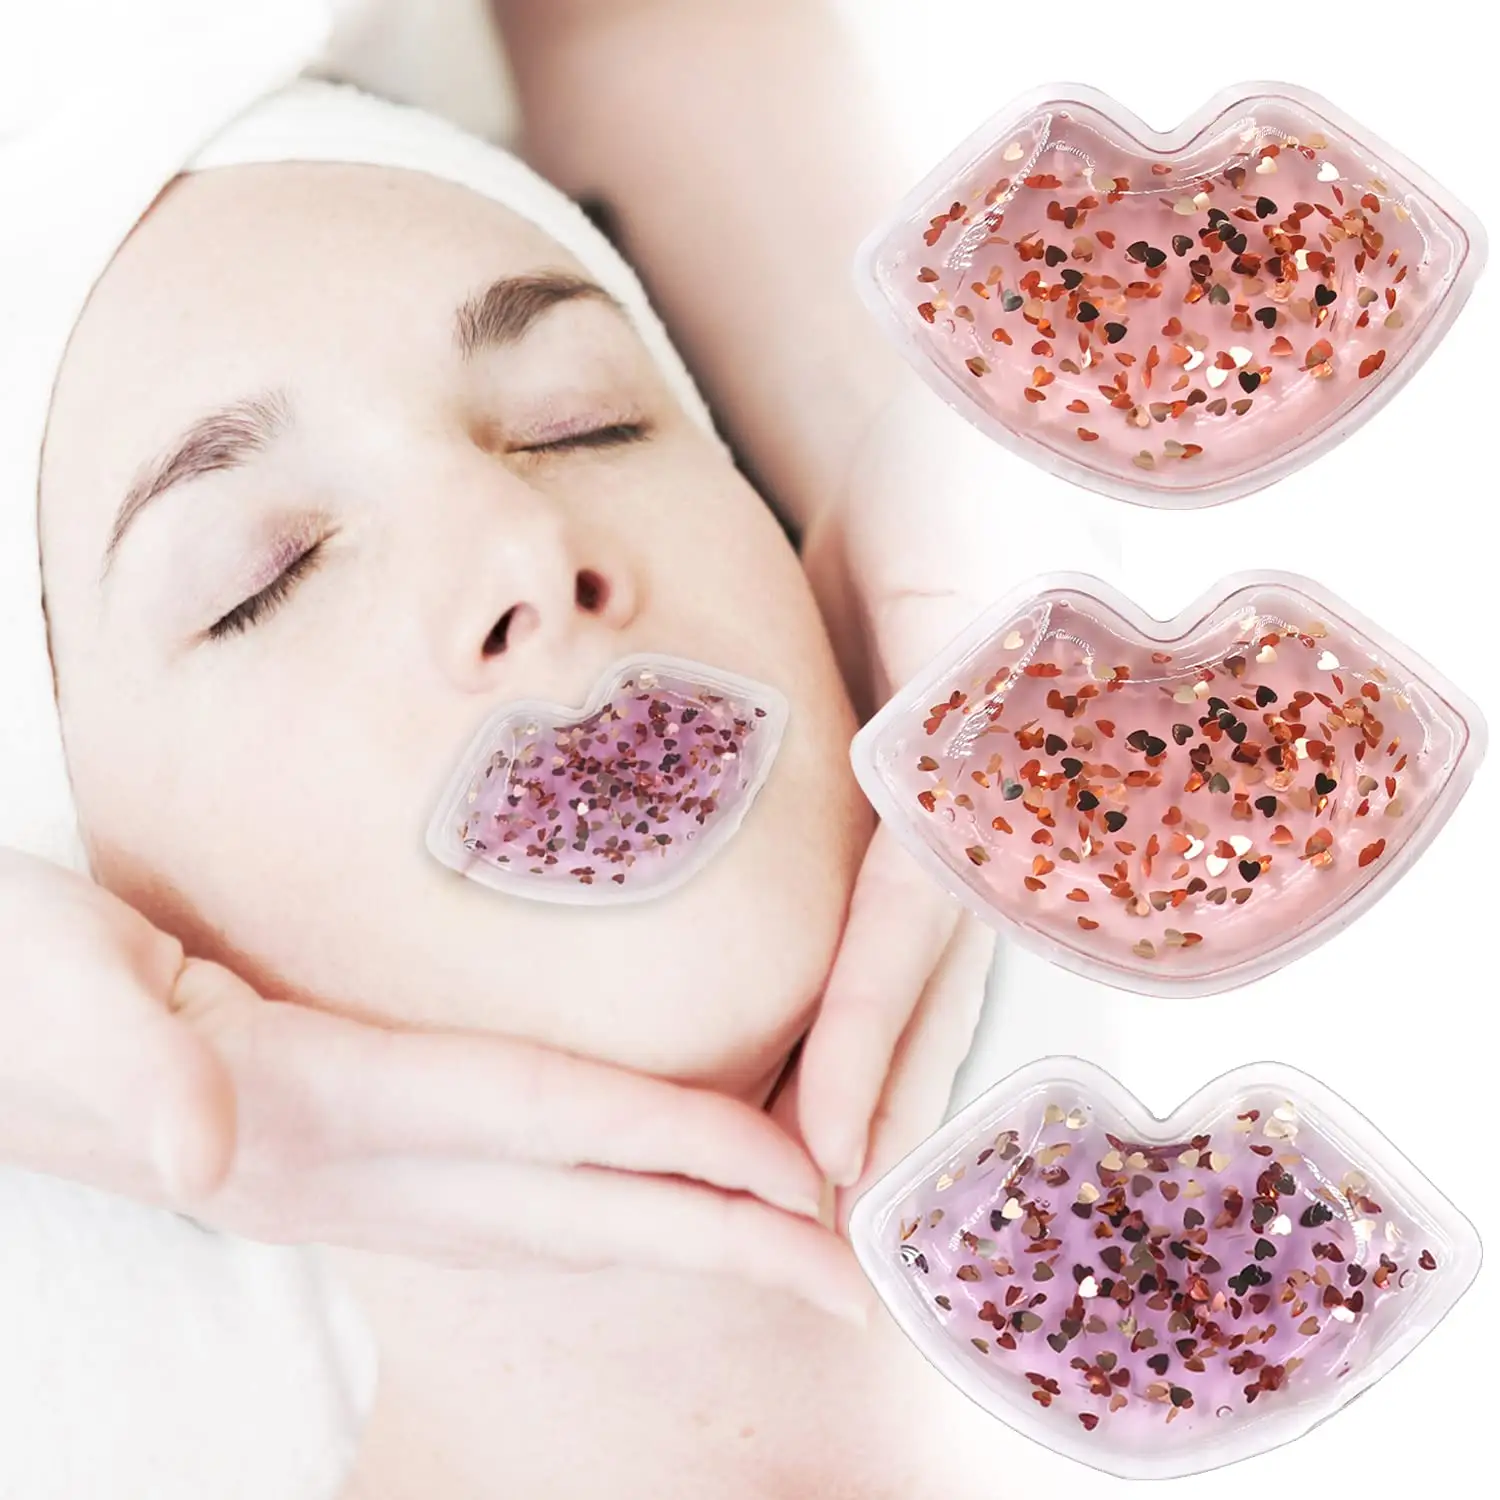 Cold Compression Of Lips Relieves Lip Swelling And Pain And Lip Care With Ice Packs